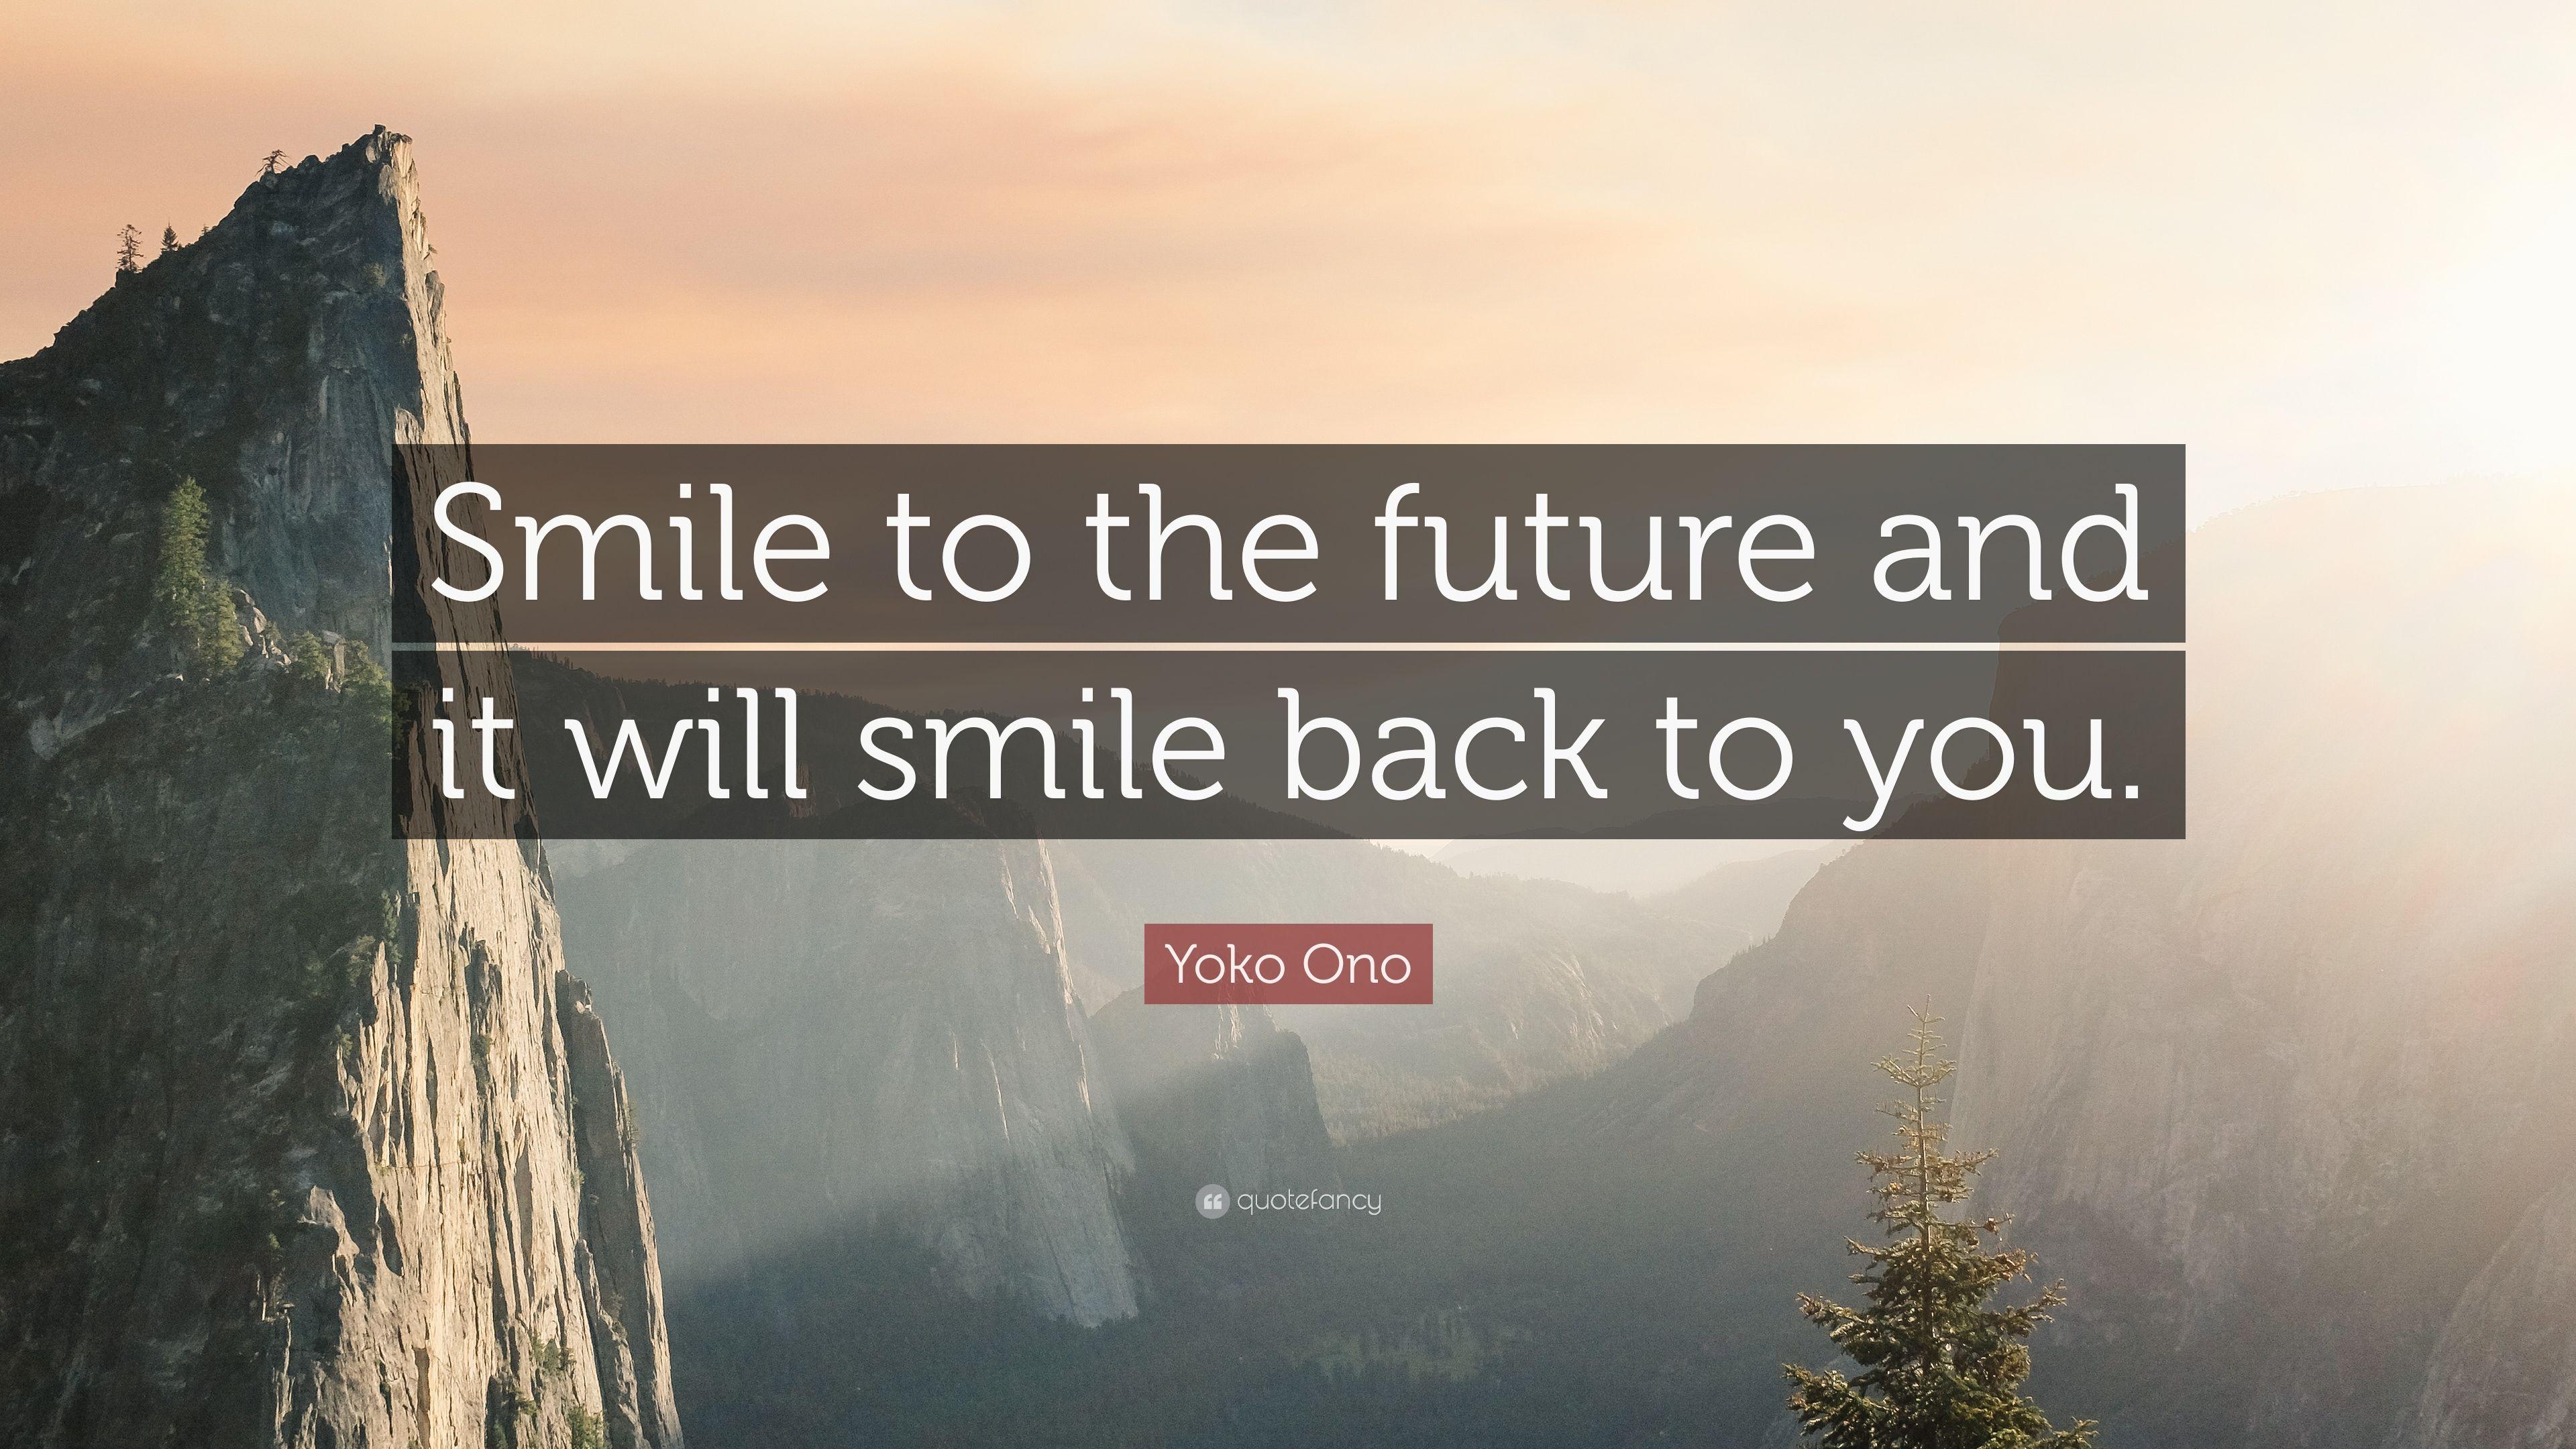 Yoko Ono Quote: “Smile to the future and it will smile back to you